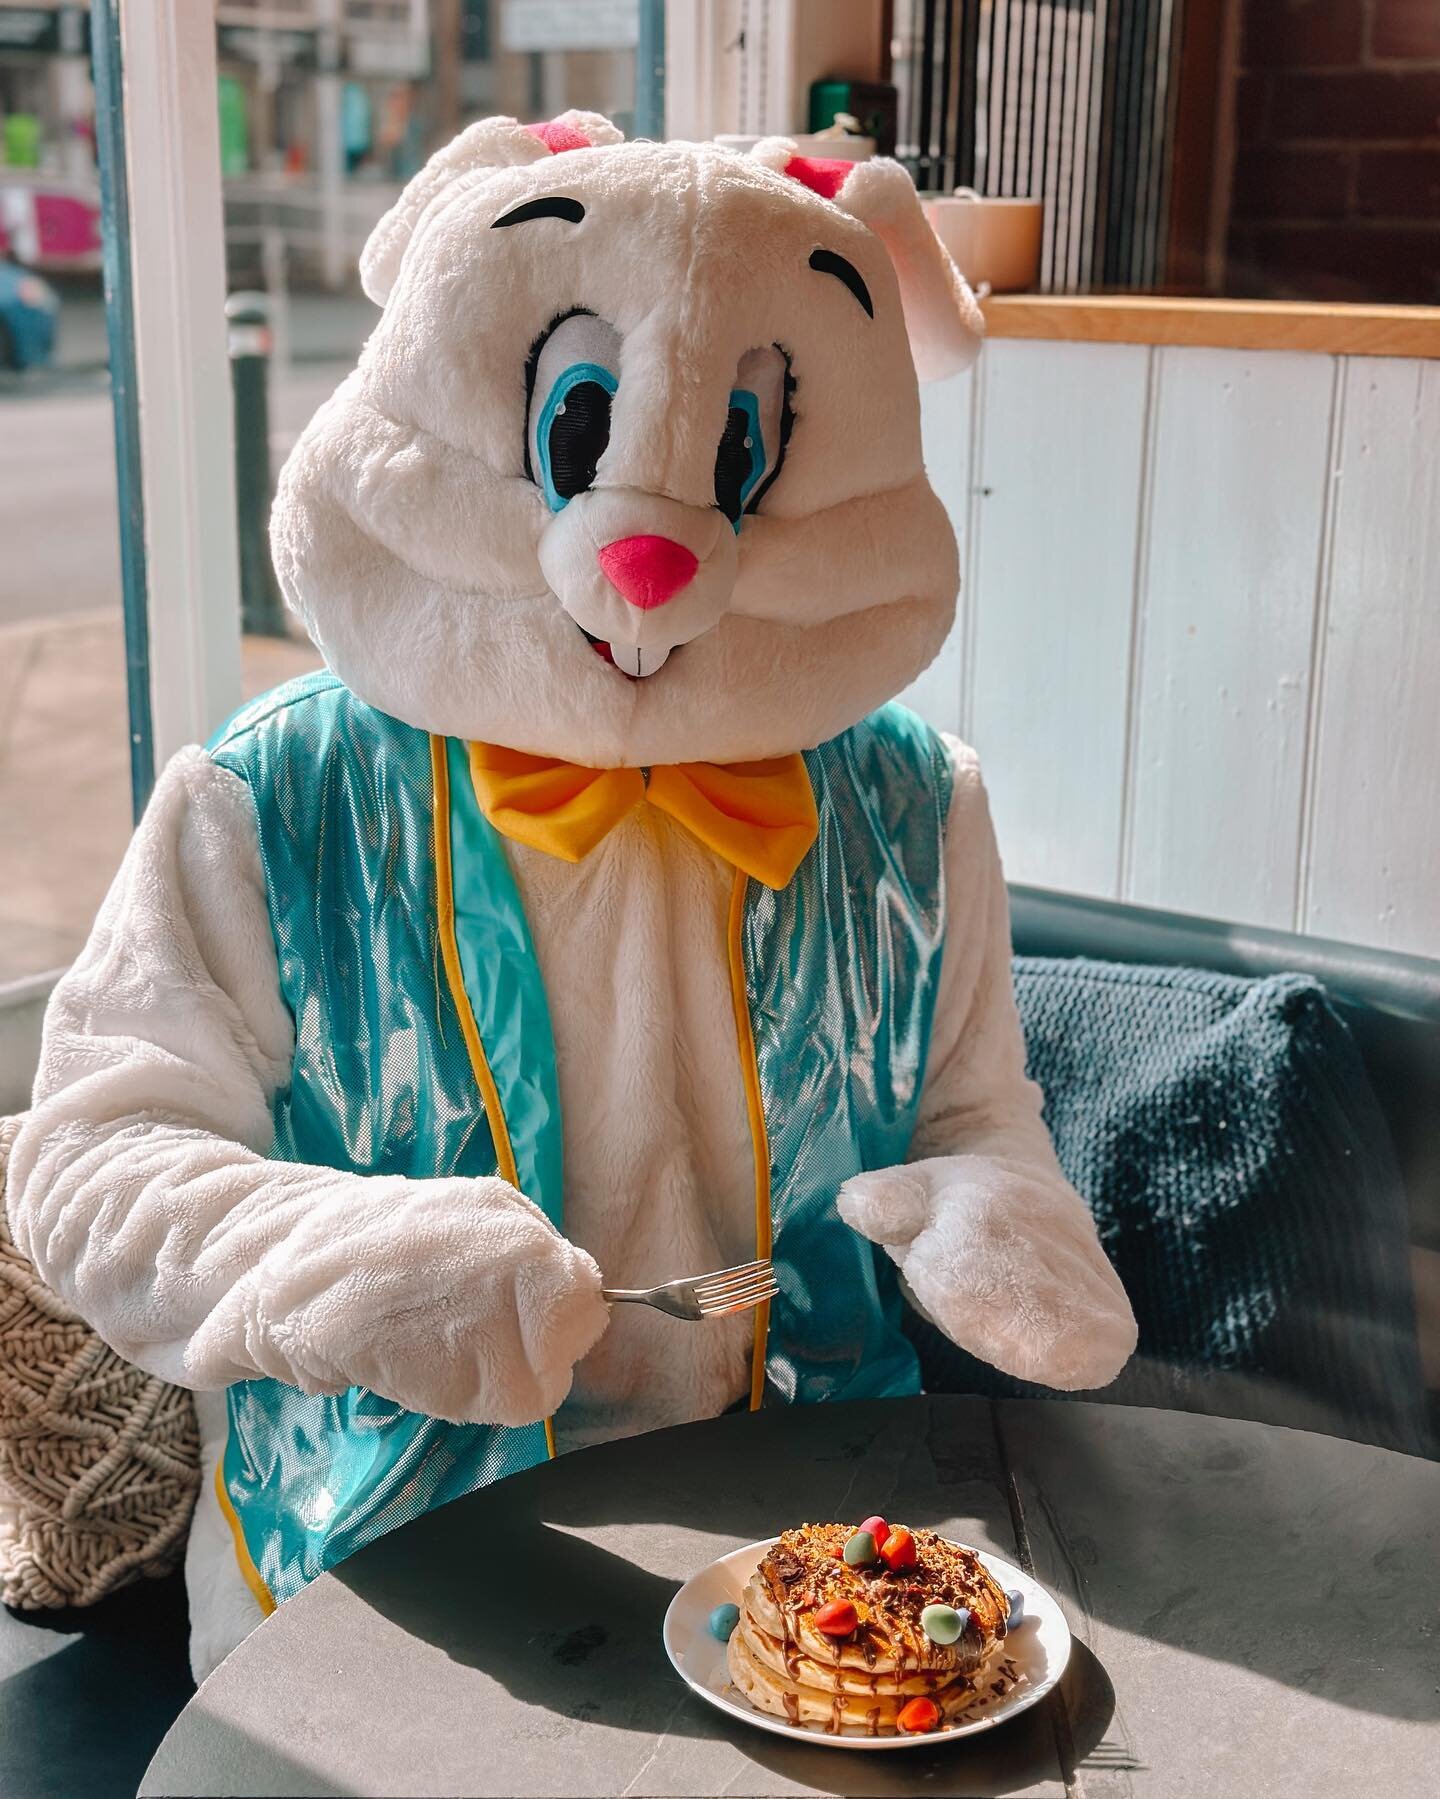 Huge thanks to everyone who joined us yesterday and ate breakfast with the Easter Bunny! We hope you're all able to spend time surrounded with the ones you love most today. *and that your enjoying some chocolate for breakfast! 🐣 💙